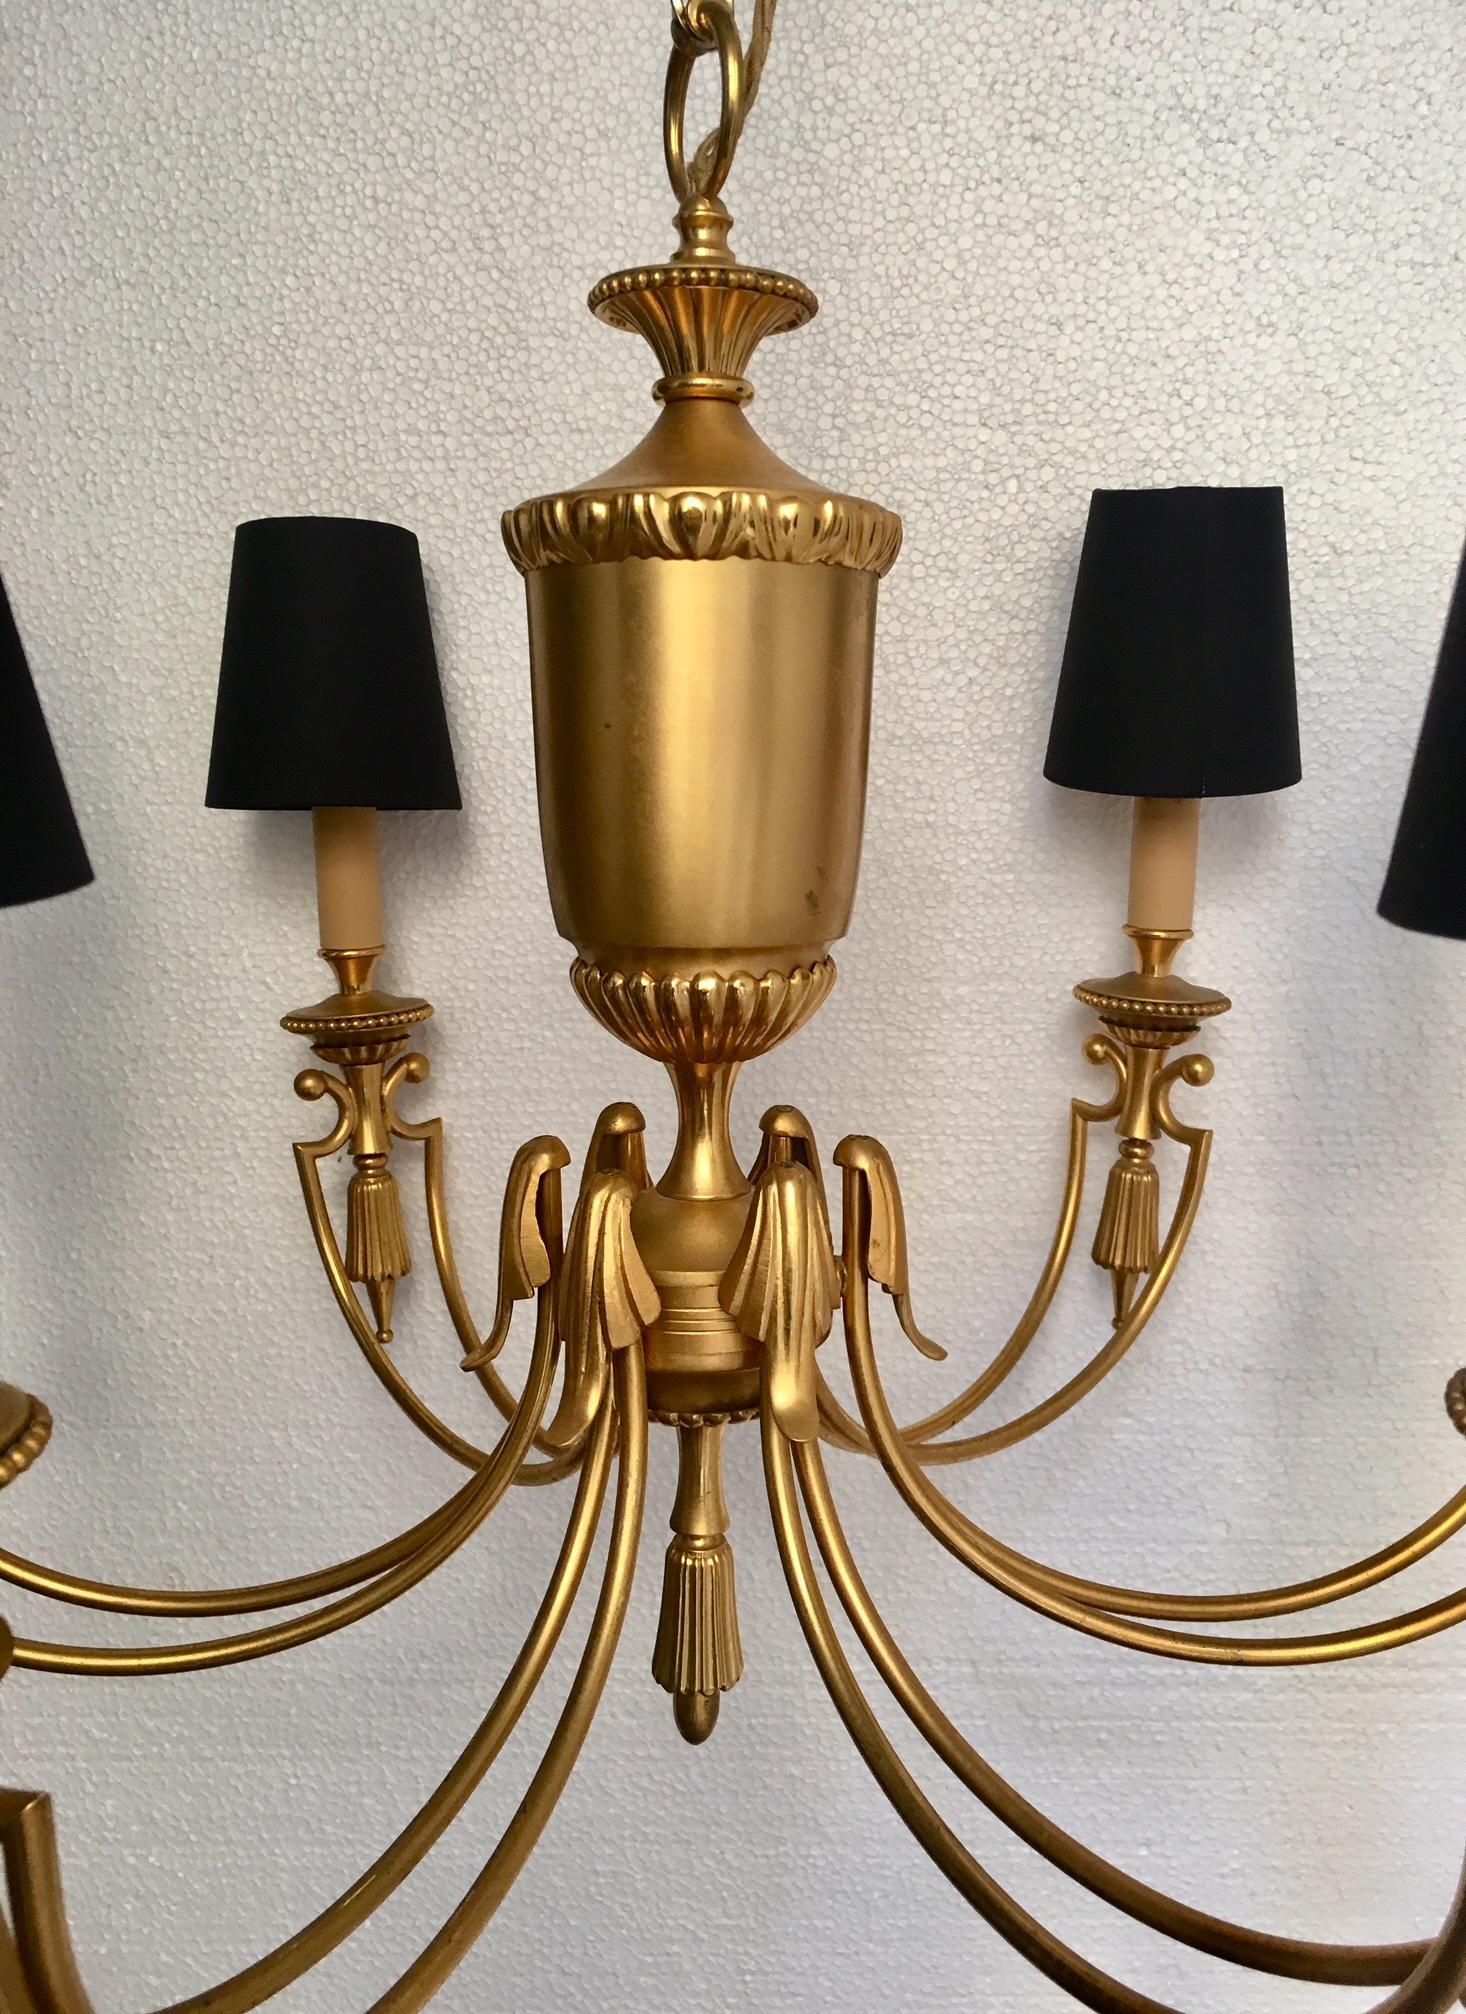 Mid century chandeliers, gold metal with six arms, shedes in black and gold.